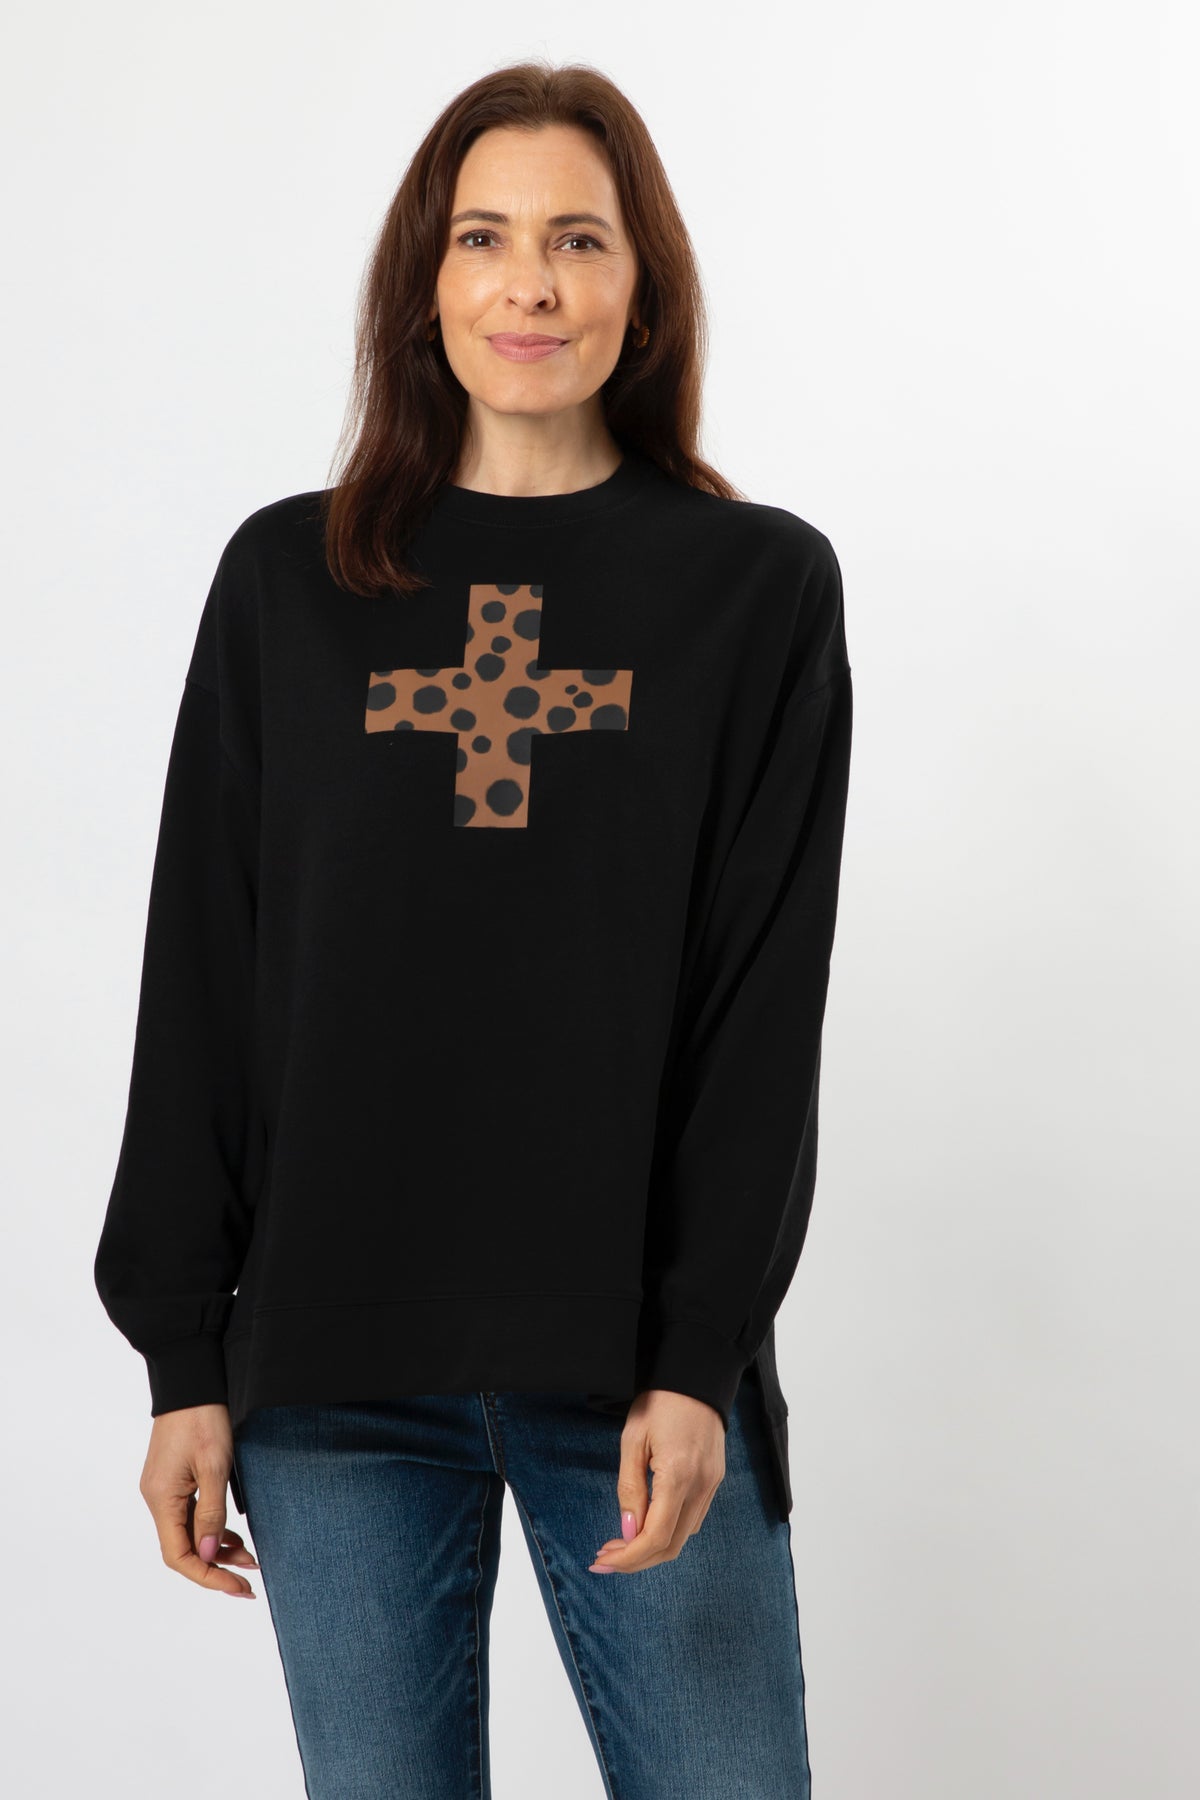 Sunday Sweater Black Choco Cheetah Cross - PREORDER DELIVERY END APRIL (Copy)